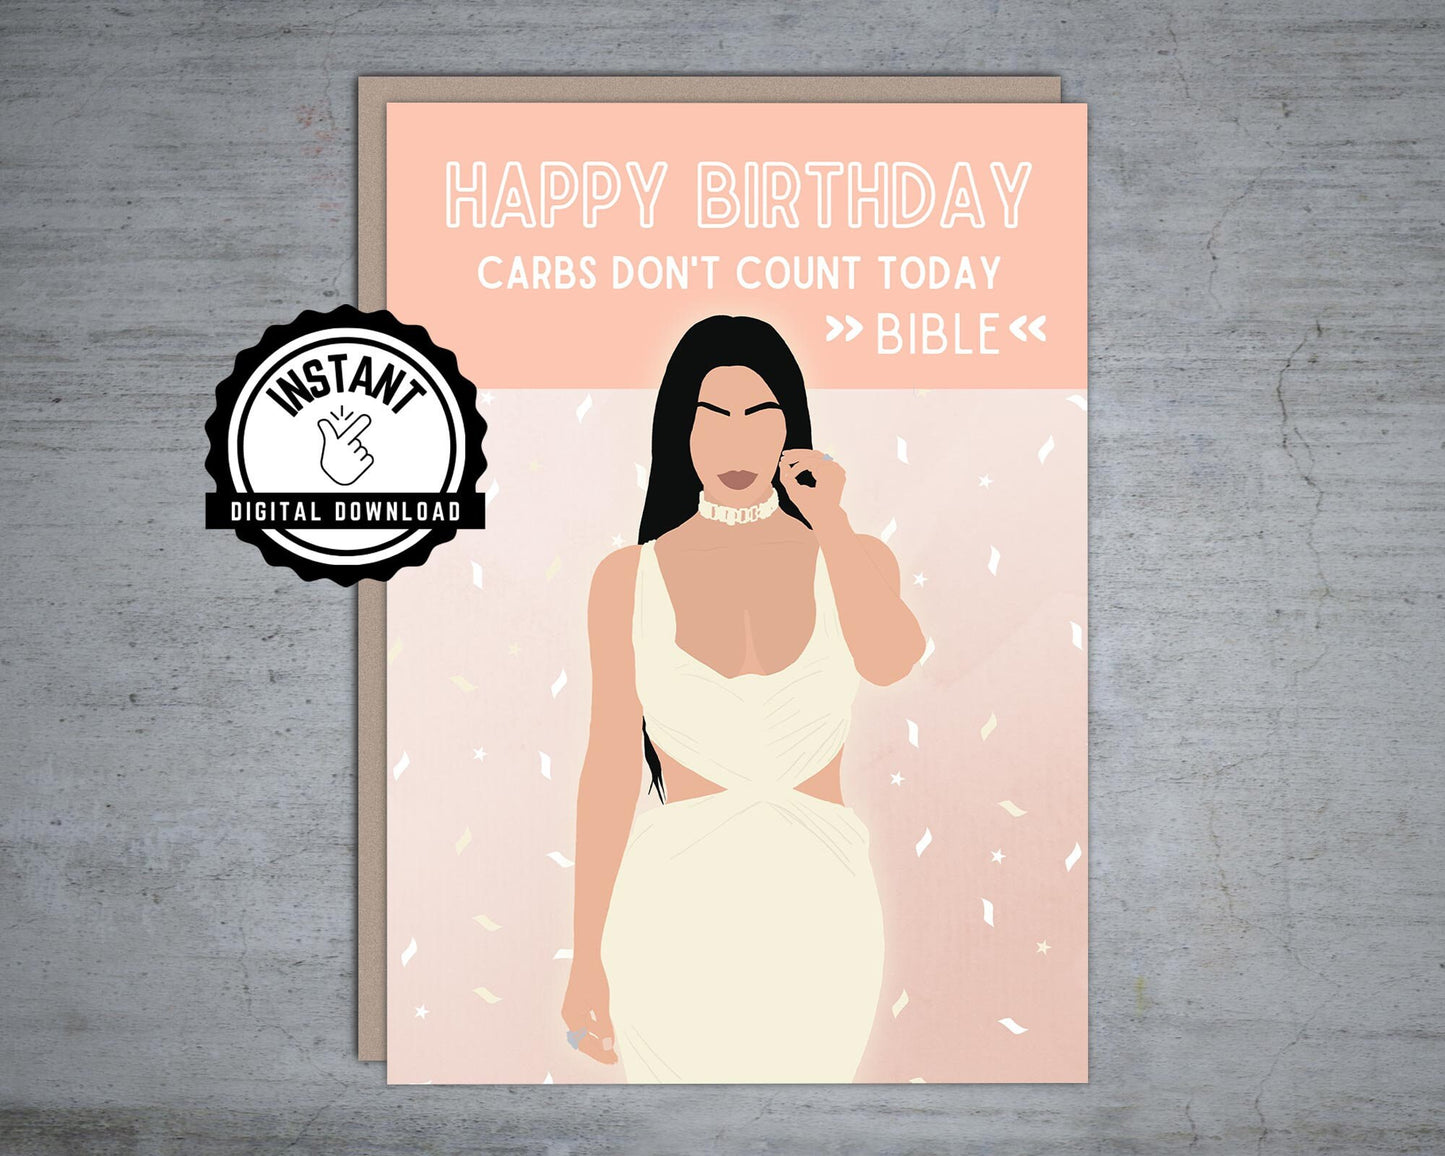 Carbs don't count today Bible | Kim Kardashian Birthday Card | Foldable 5X7 Instant Digital Download